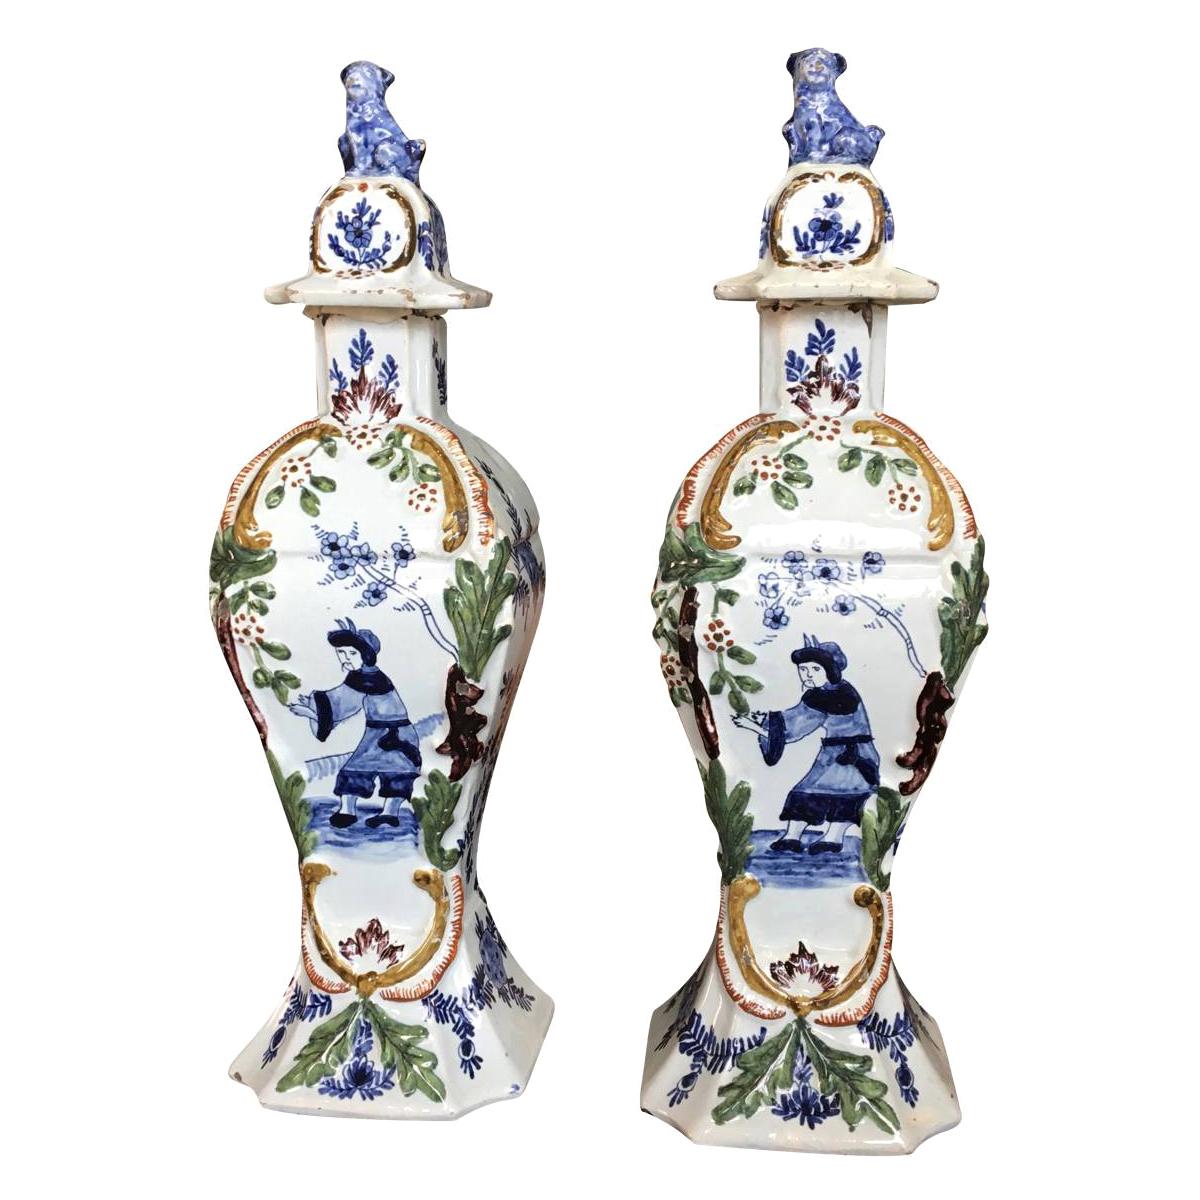 Pair of 18th Century Delft Lidded Jars, Chinoiserie Decor